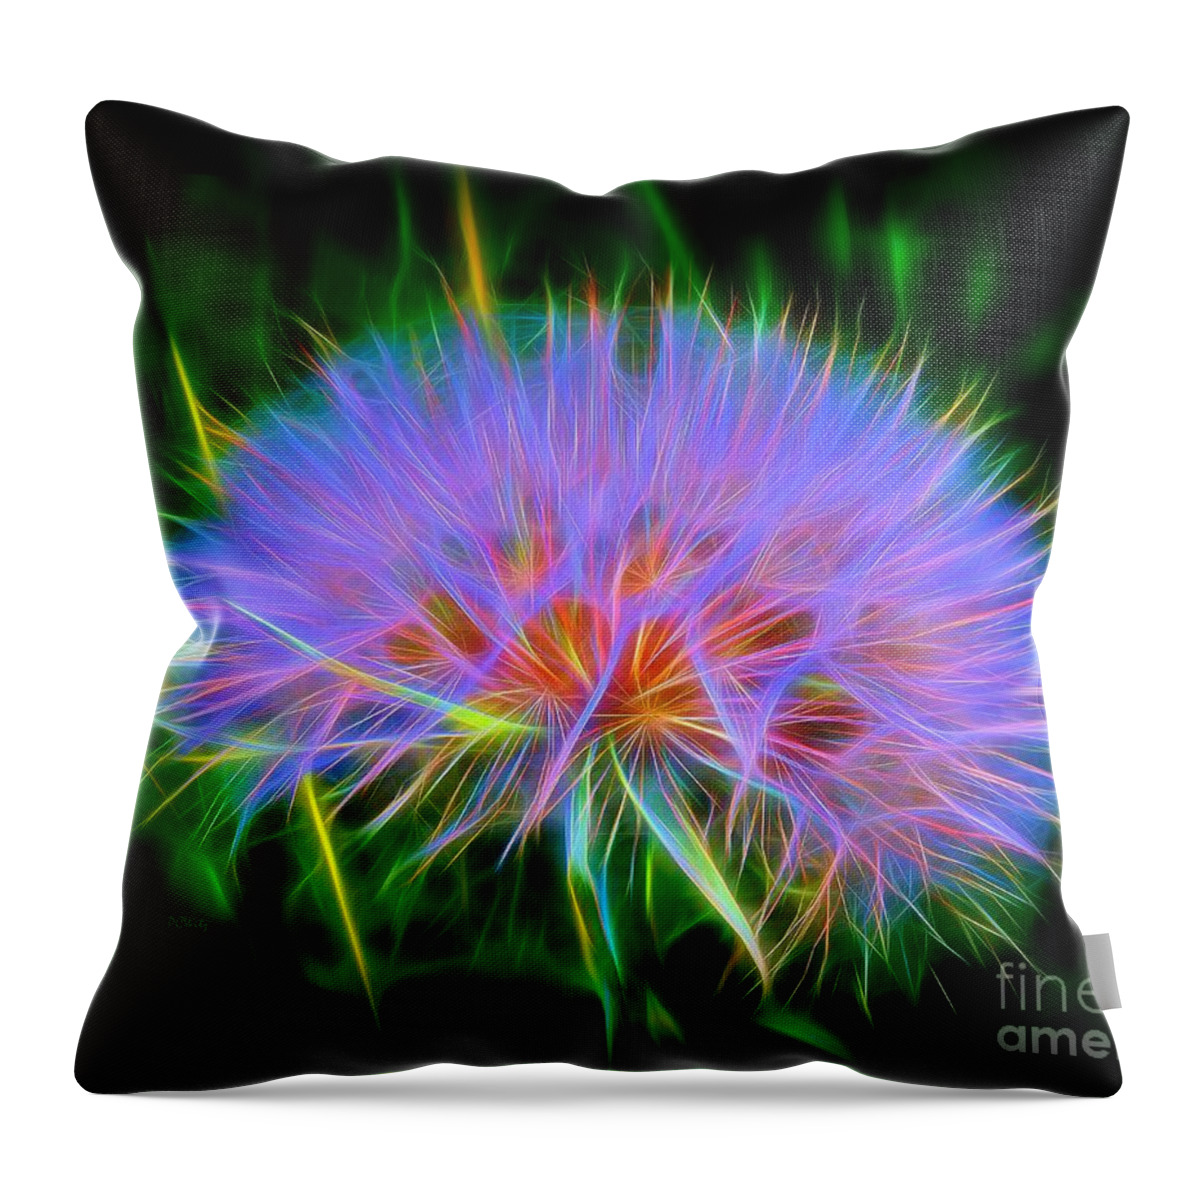 Colorful Puffball Throw Pillow featuring the photograph Colorful Puffball by Patrick Witz